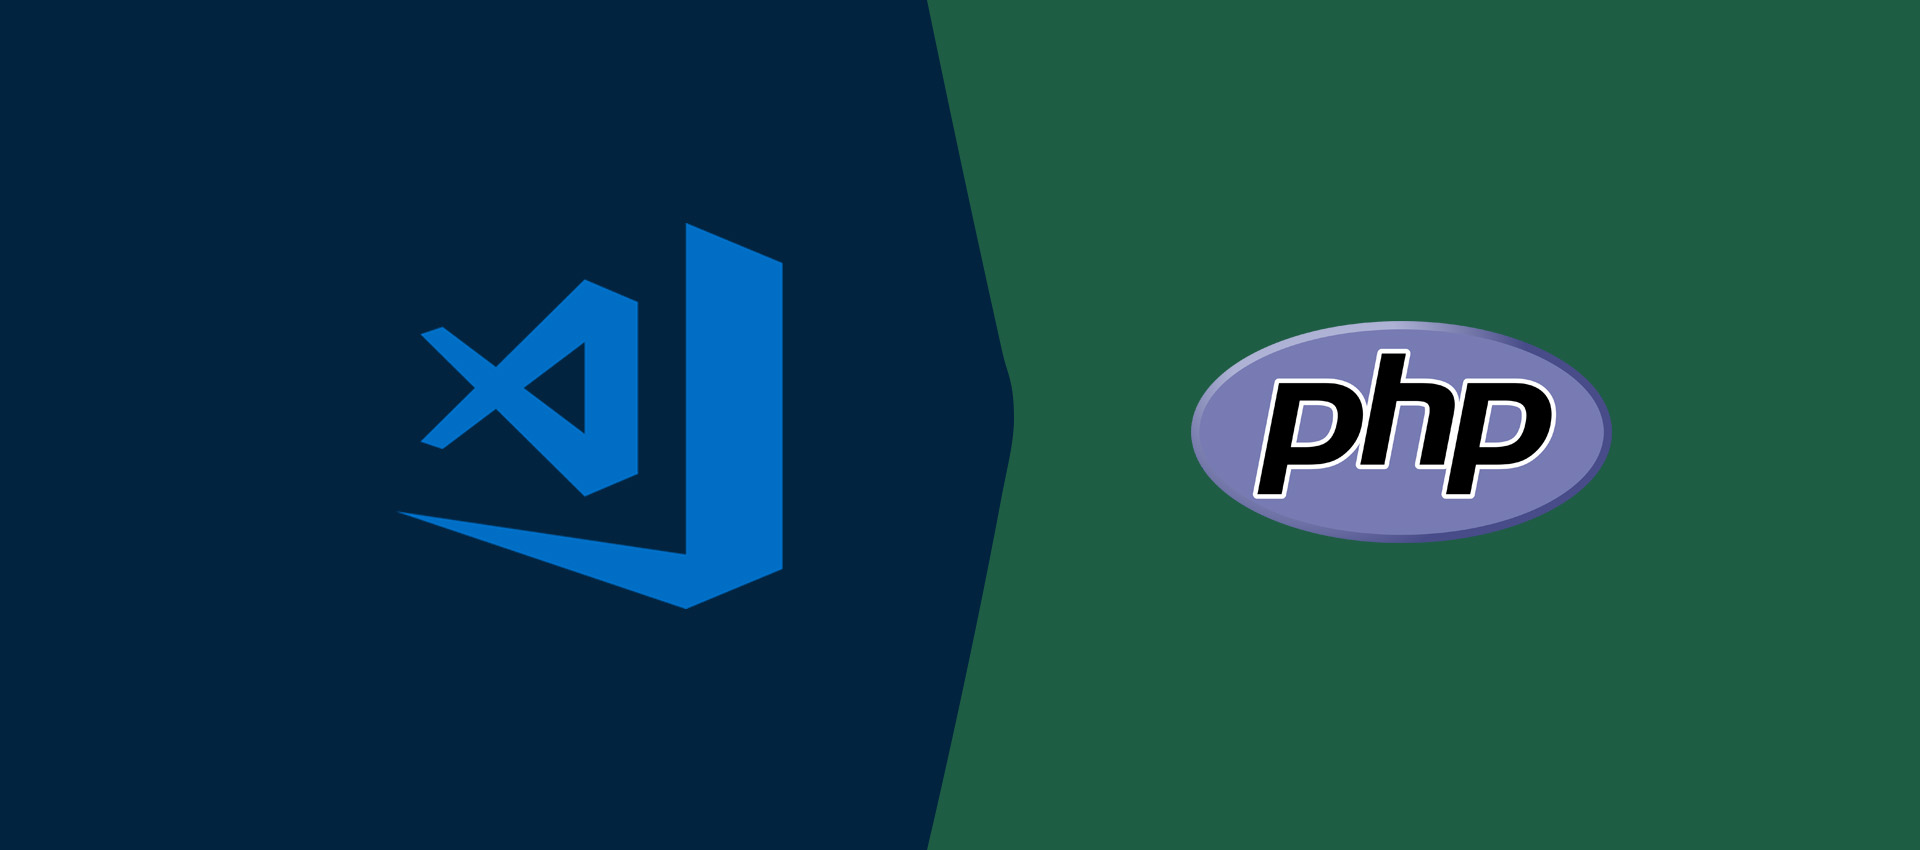 How To Install VSCode For PHP On Windows